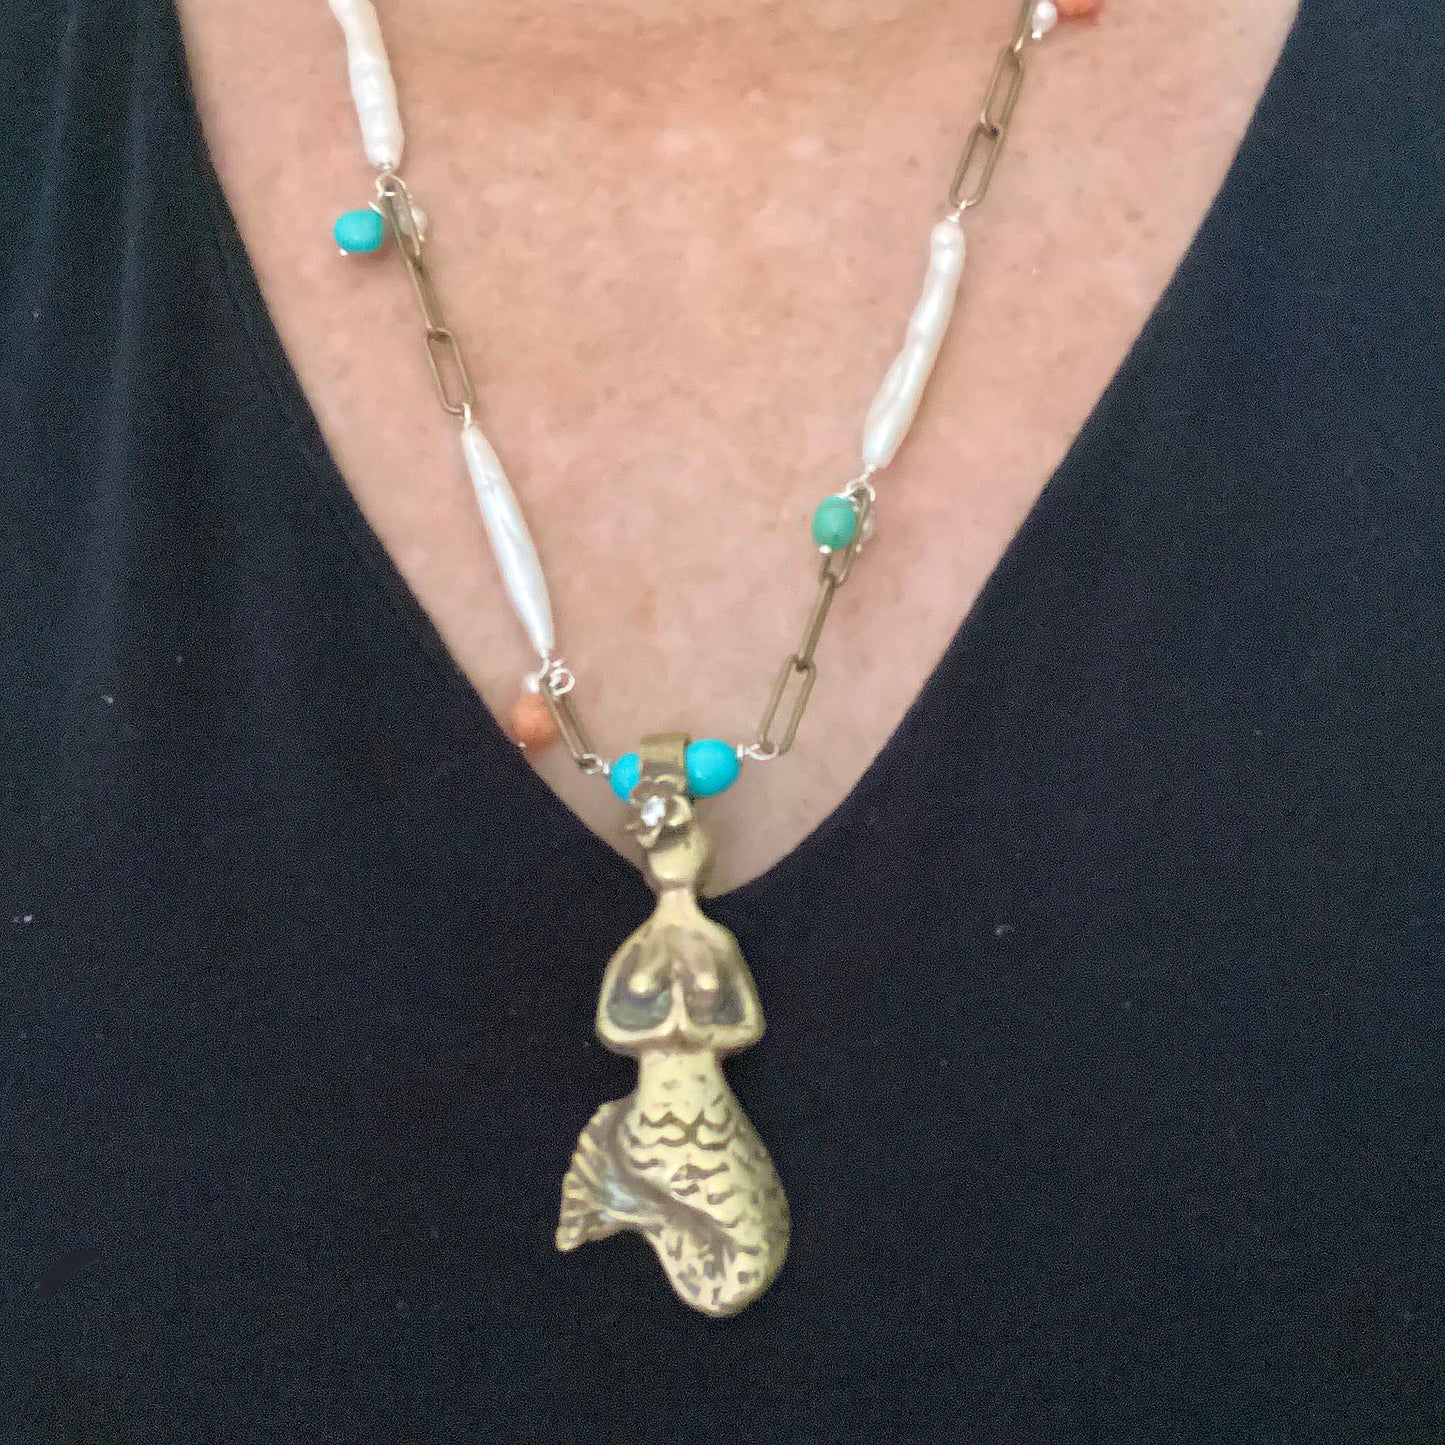 Namaste Mermaid with Plumeria, Turquoise, Angelskin Coral and Freshwater Pearls